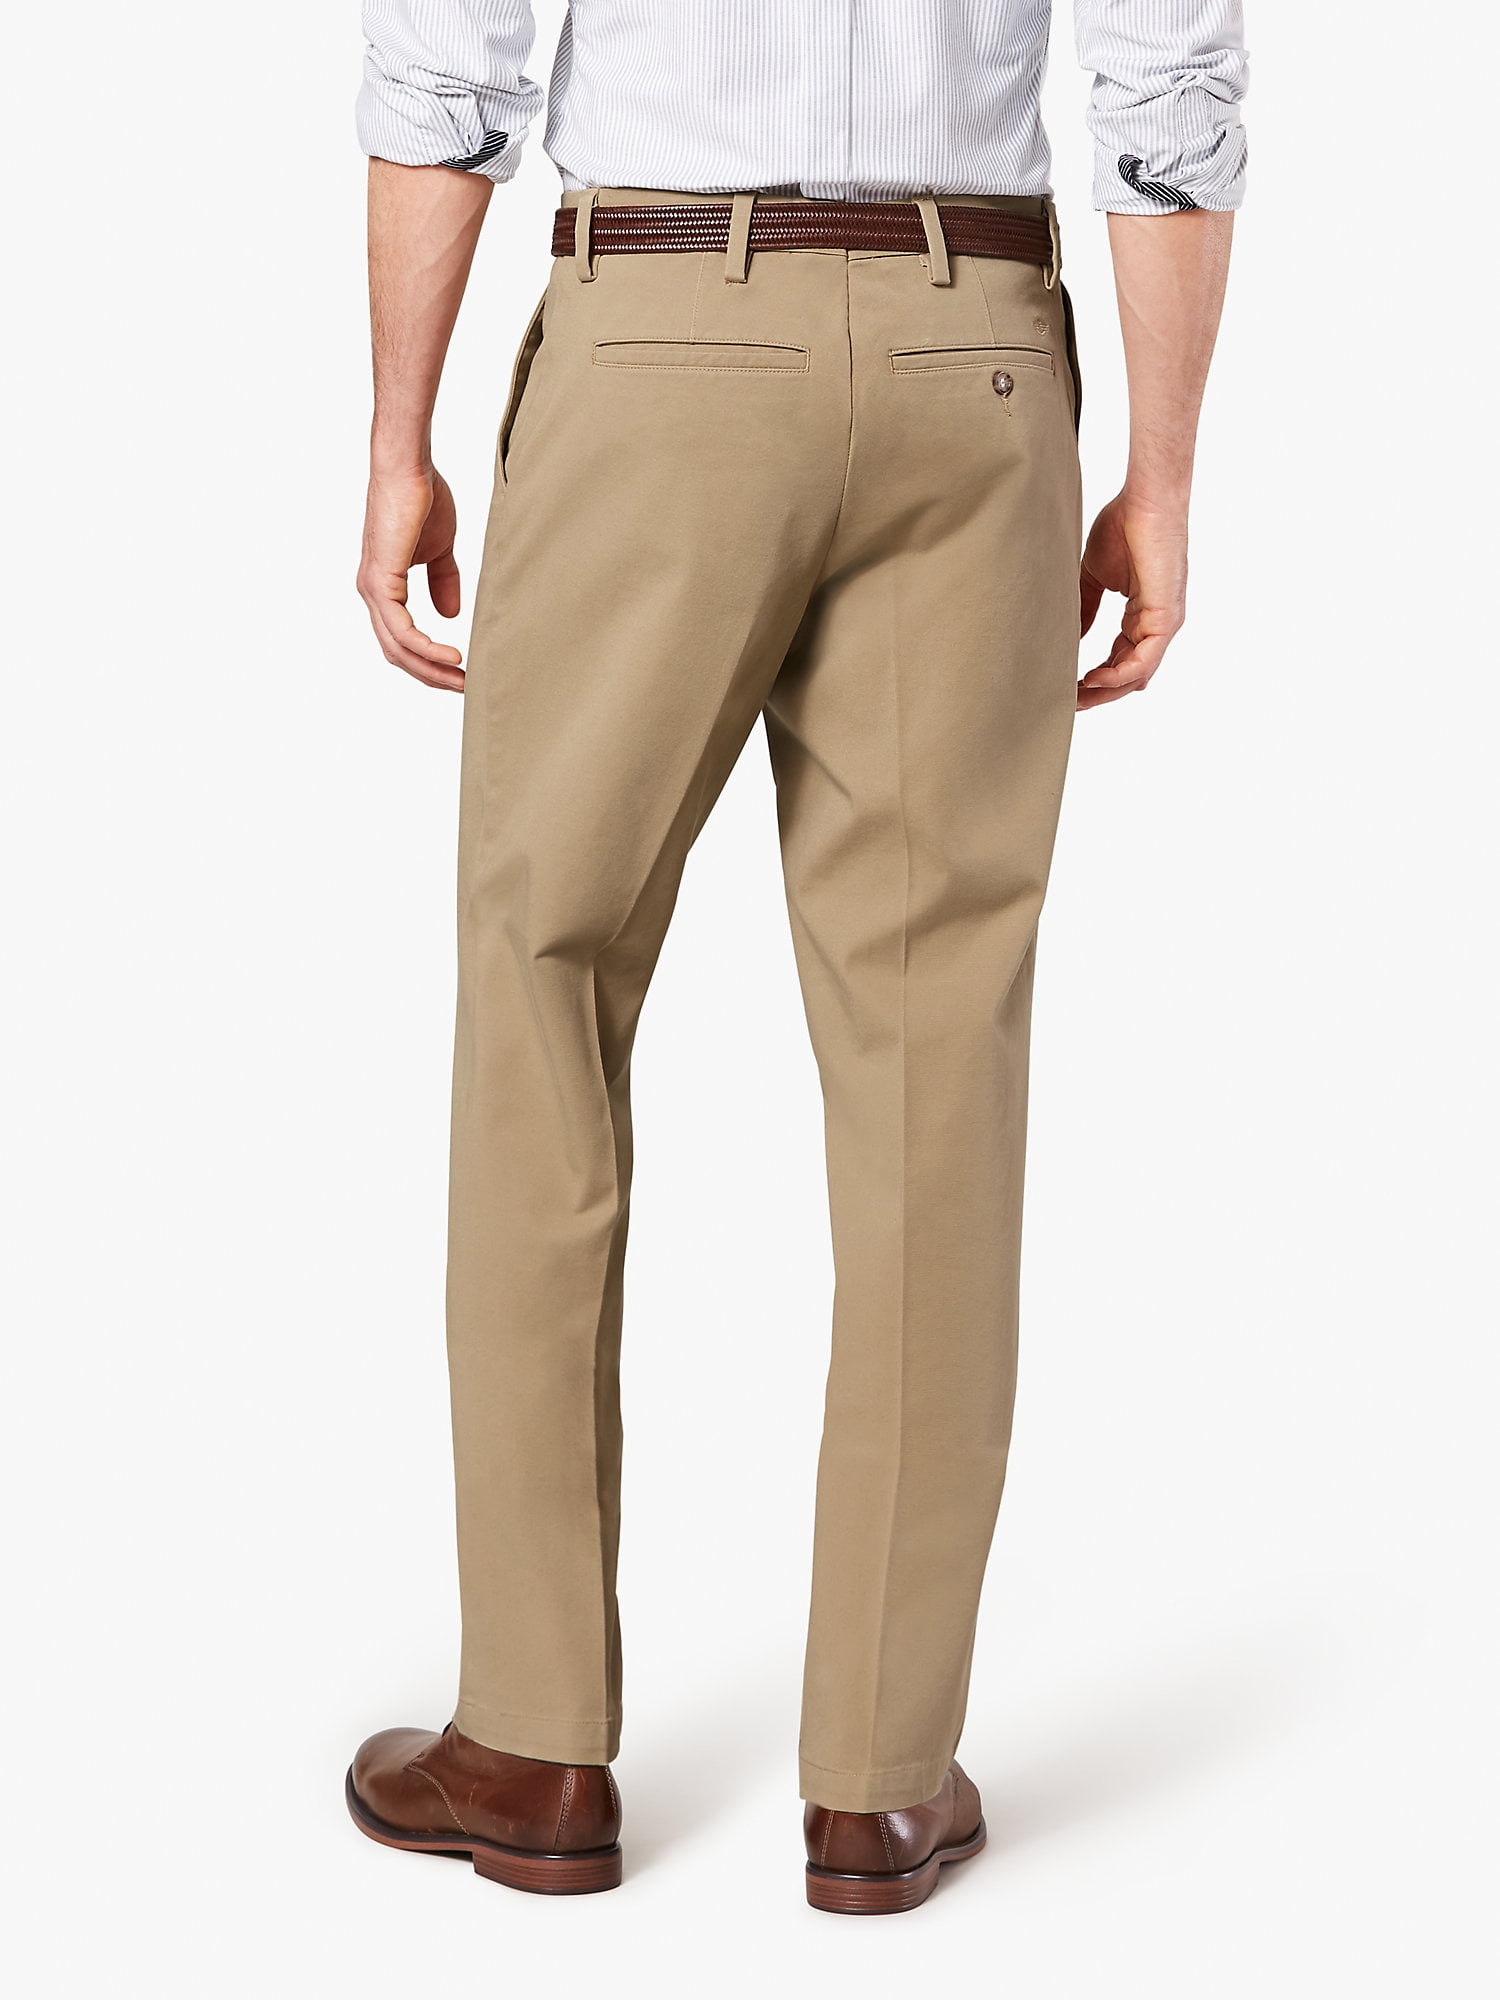 This New Dockers Collab Will Make You Want to Wear Khakis in 2022  GQ